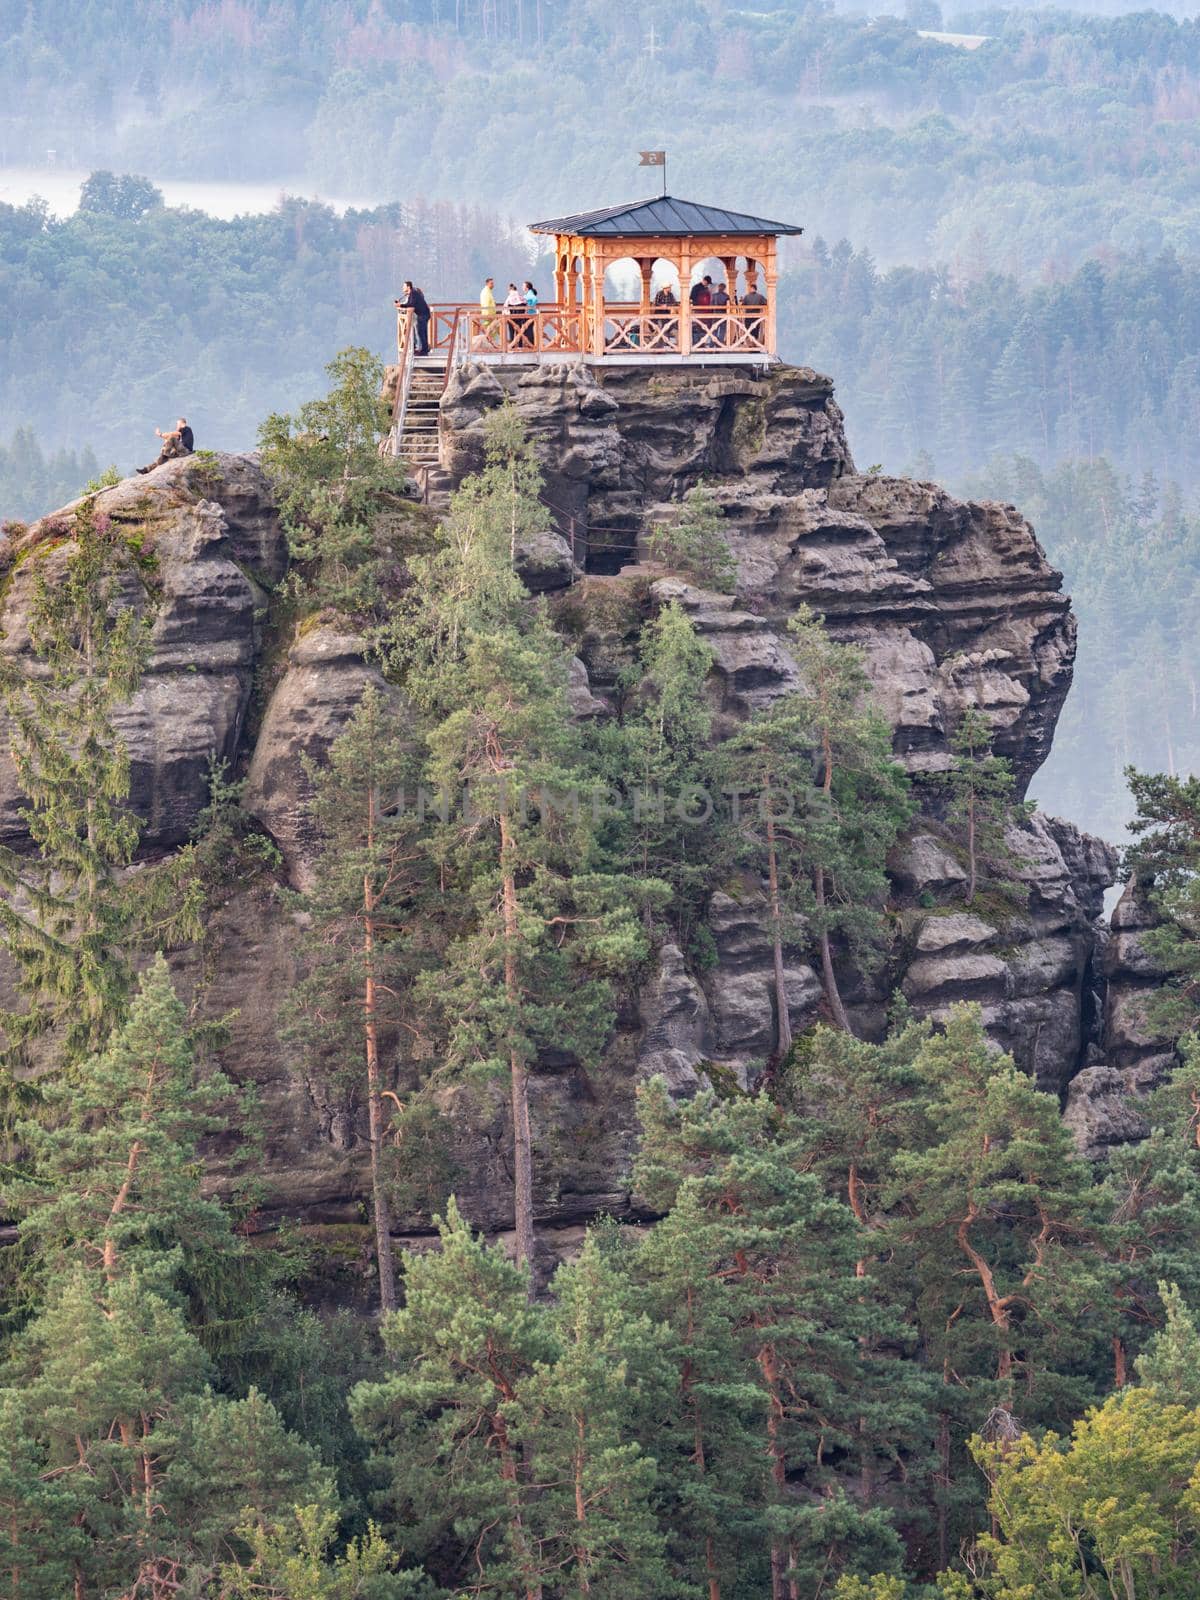 Breakfast or picnic of tourists on lookout tower Mariina vyhlidka by rdonar2